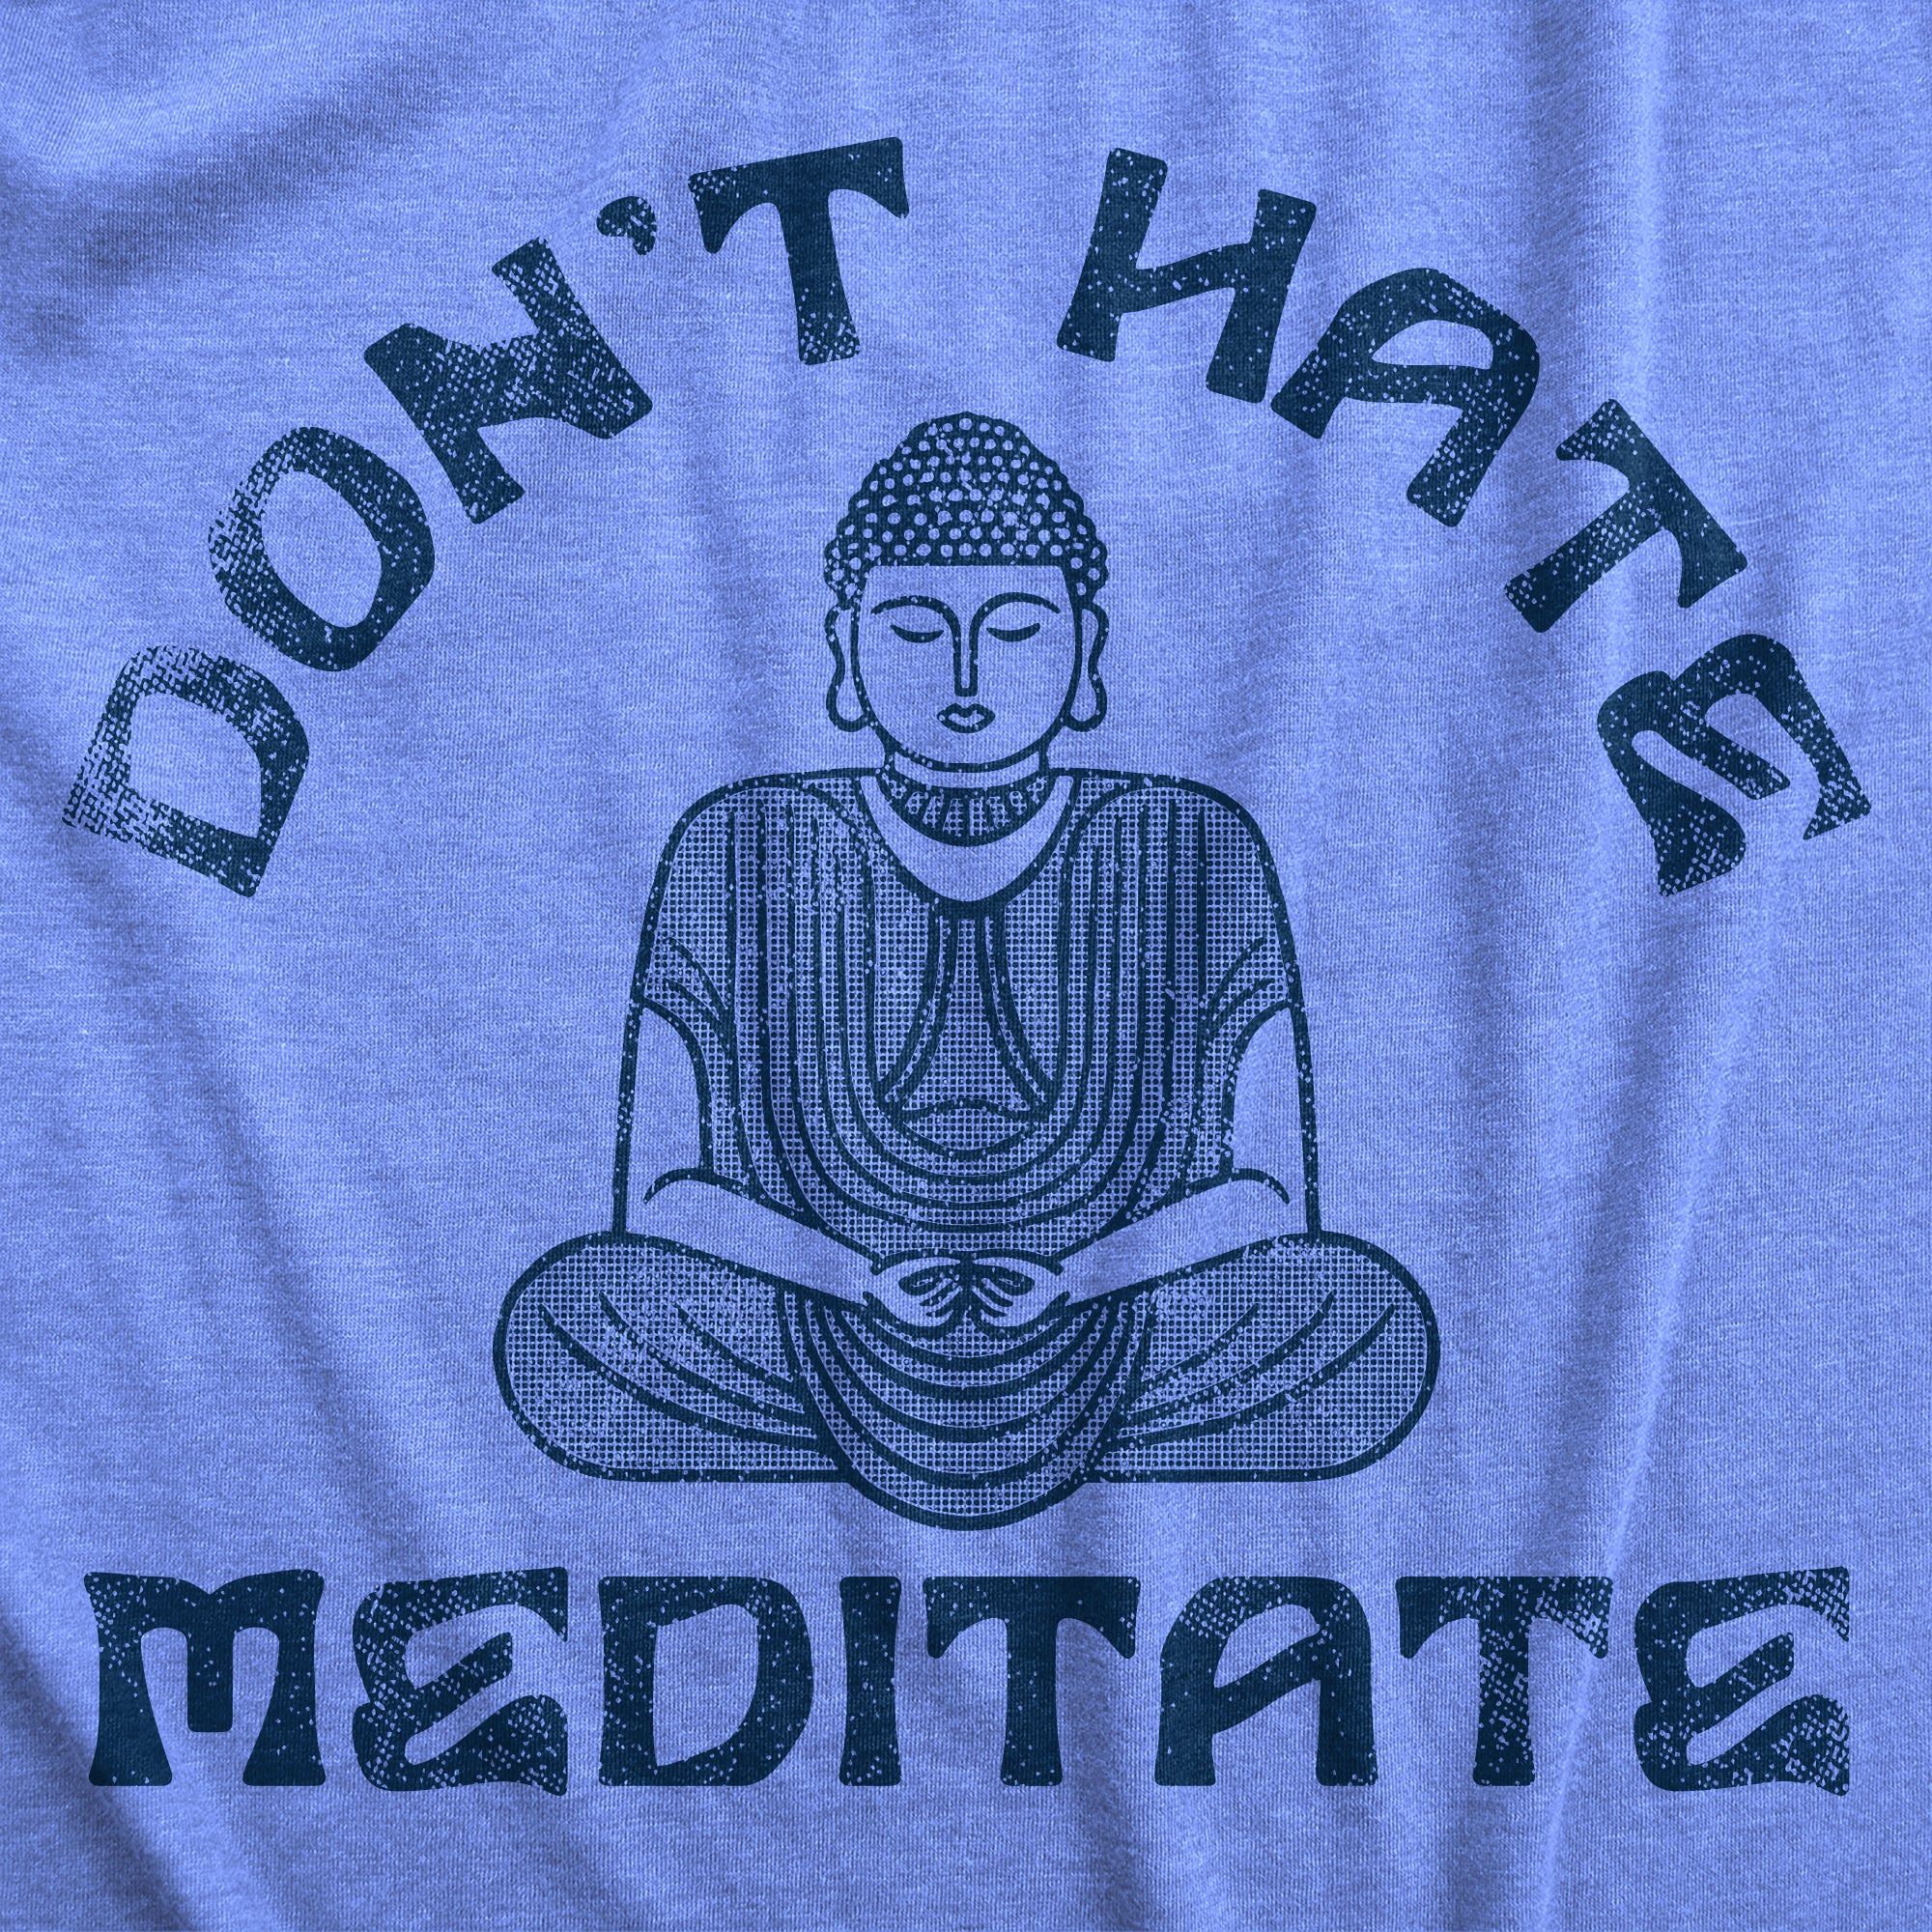 Funny Light Heather Blue - Dont Hate Dont Hate Meditate Mens T Shirt Nerdy Sarcastic Motivational Tee